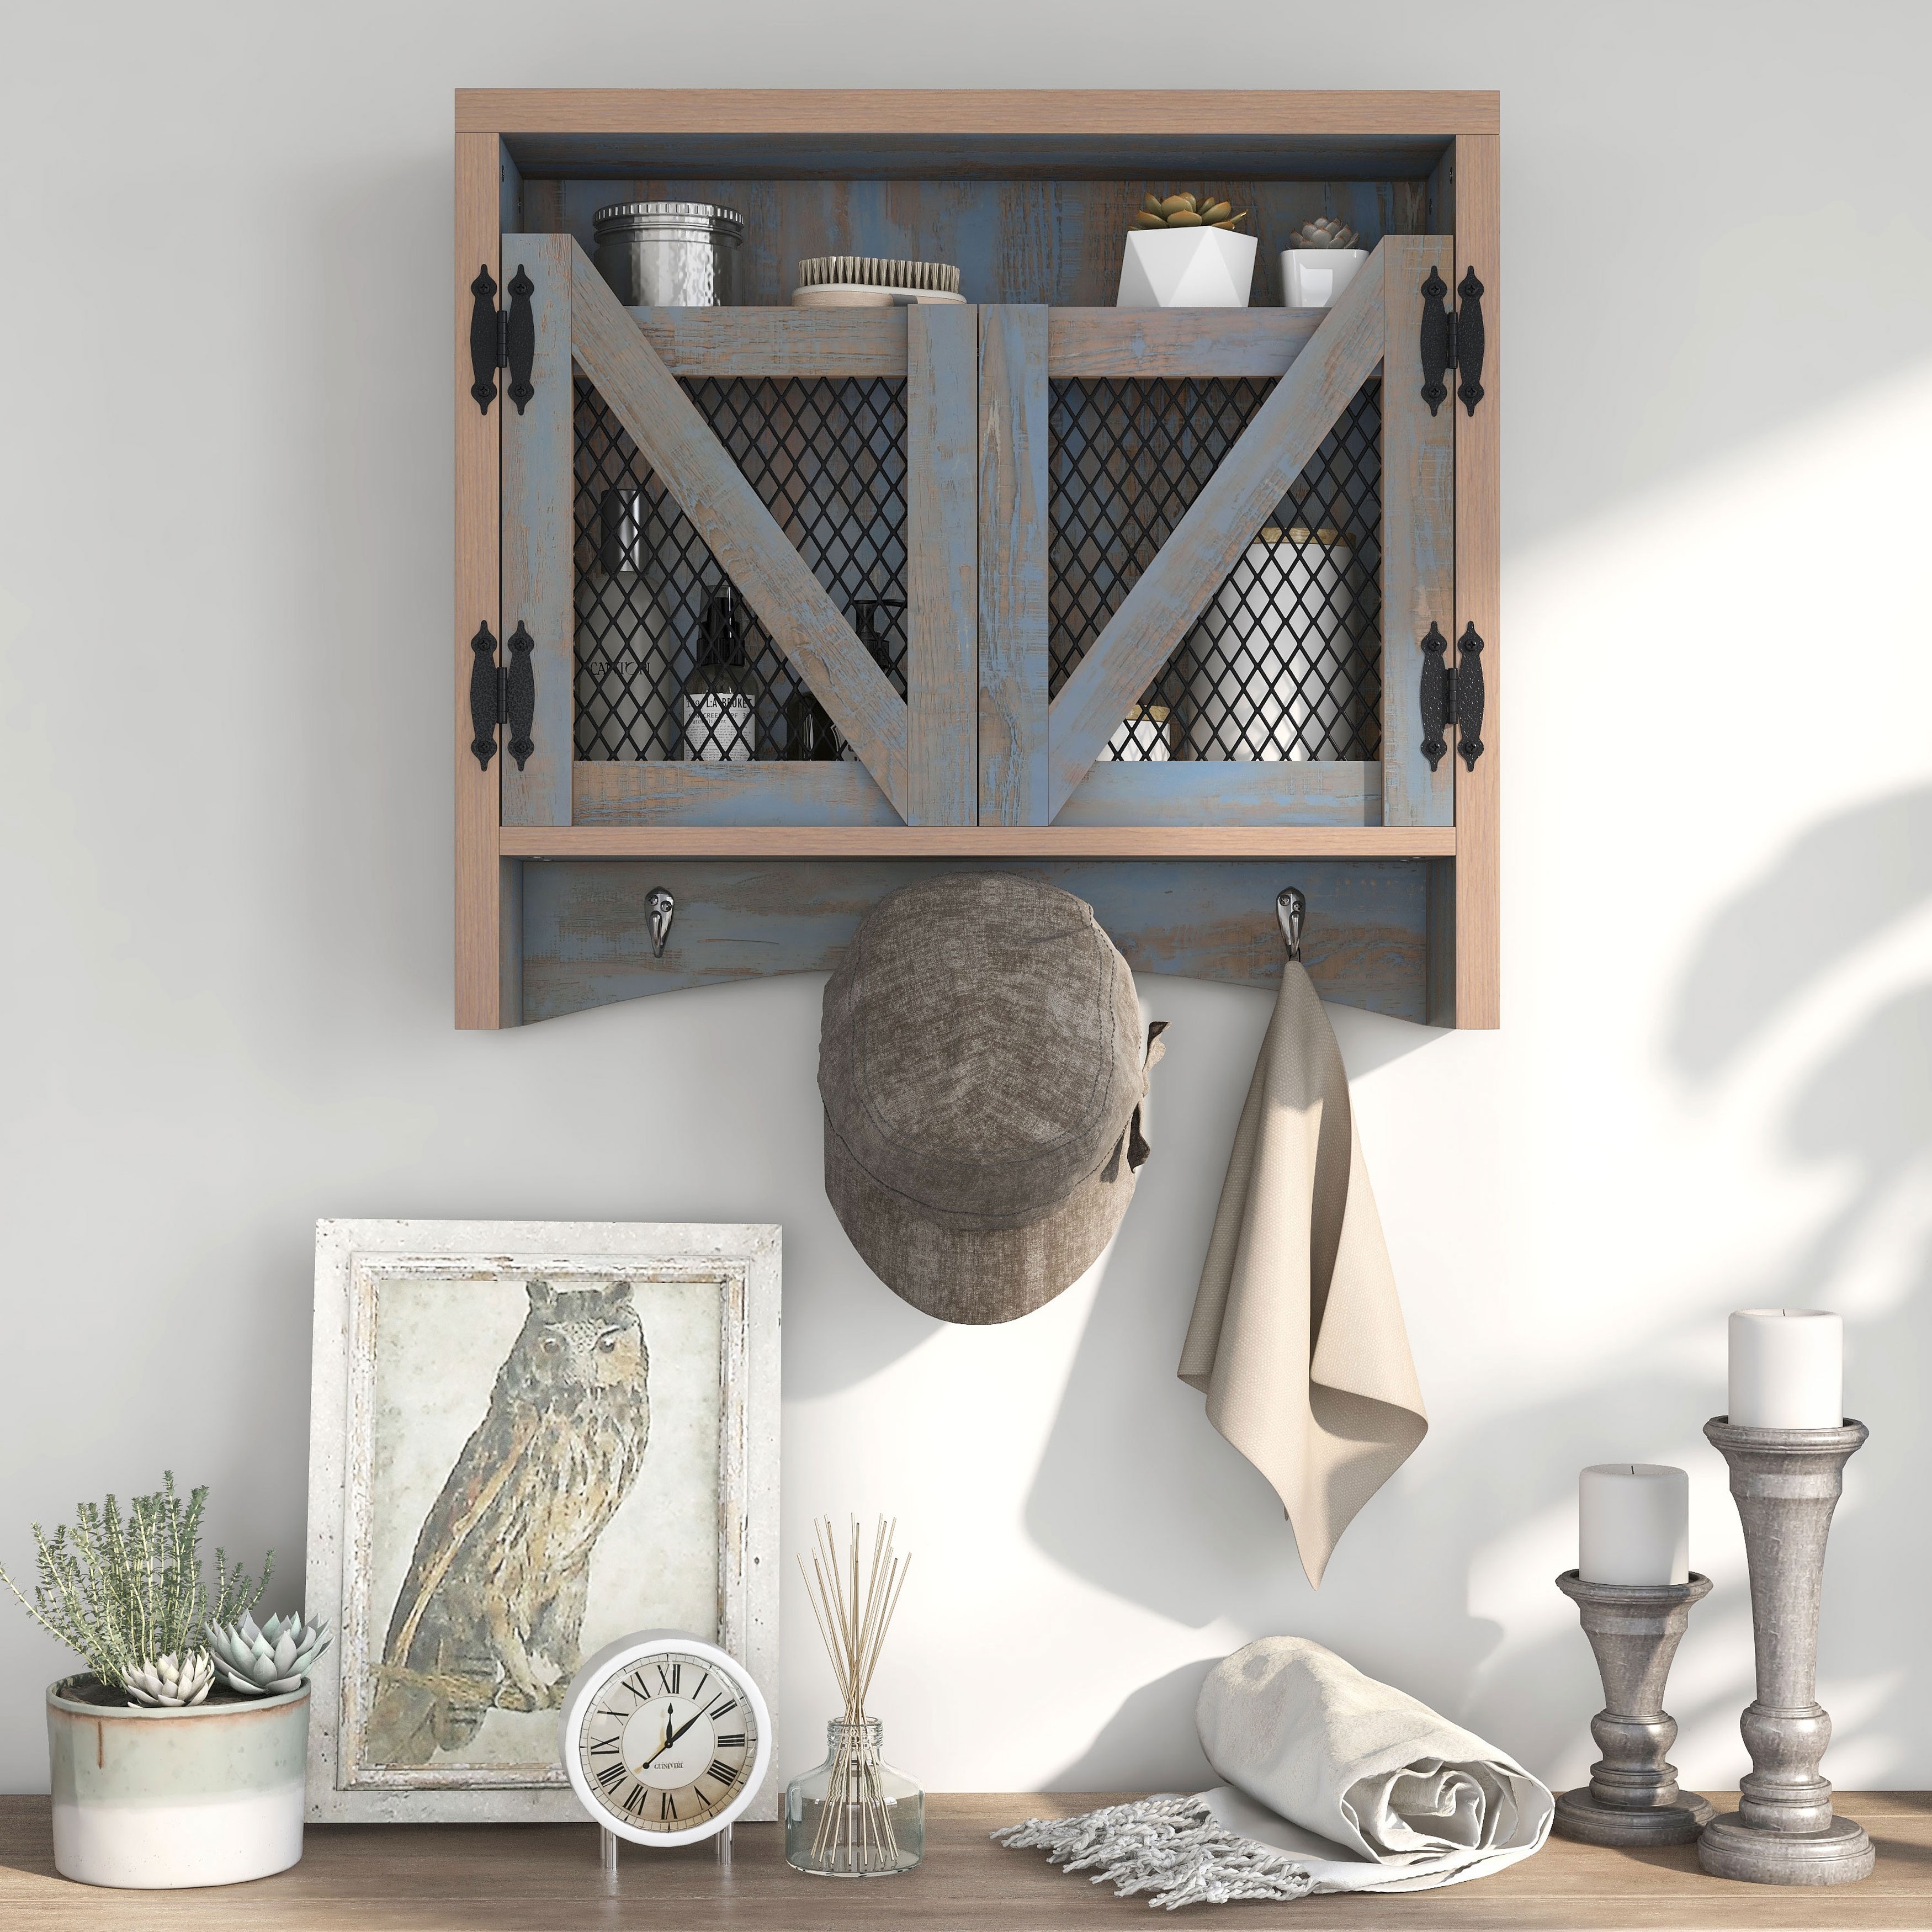 https://ak1.ostkcdn.com/images/products/is/images/direct/6a5a38db1ba1a4f34bb8aa2232f994bce888ad2a/DH-BASIC-Farmhouse-Blue-Entryway-Wall-Organizer-with-Hooks-by-Denhour.jpg